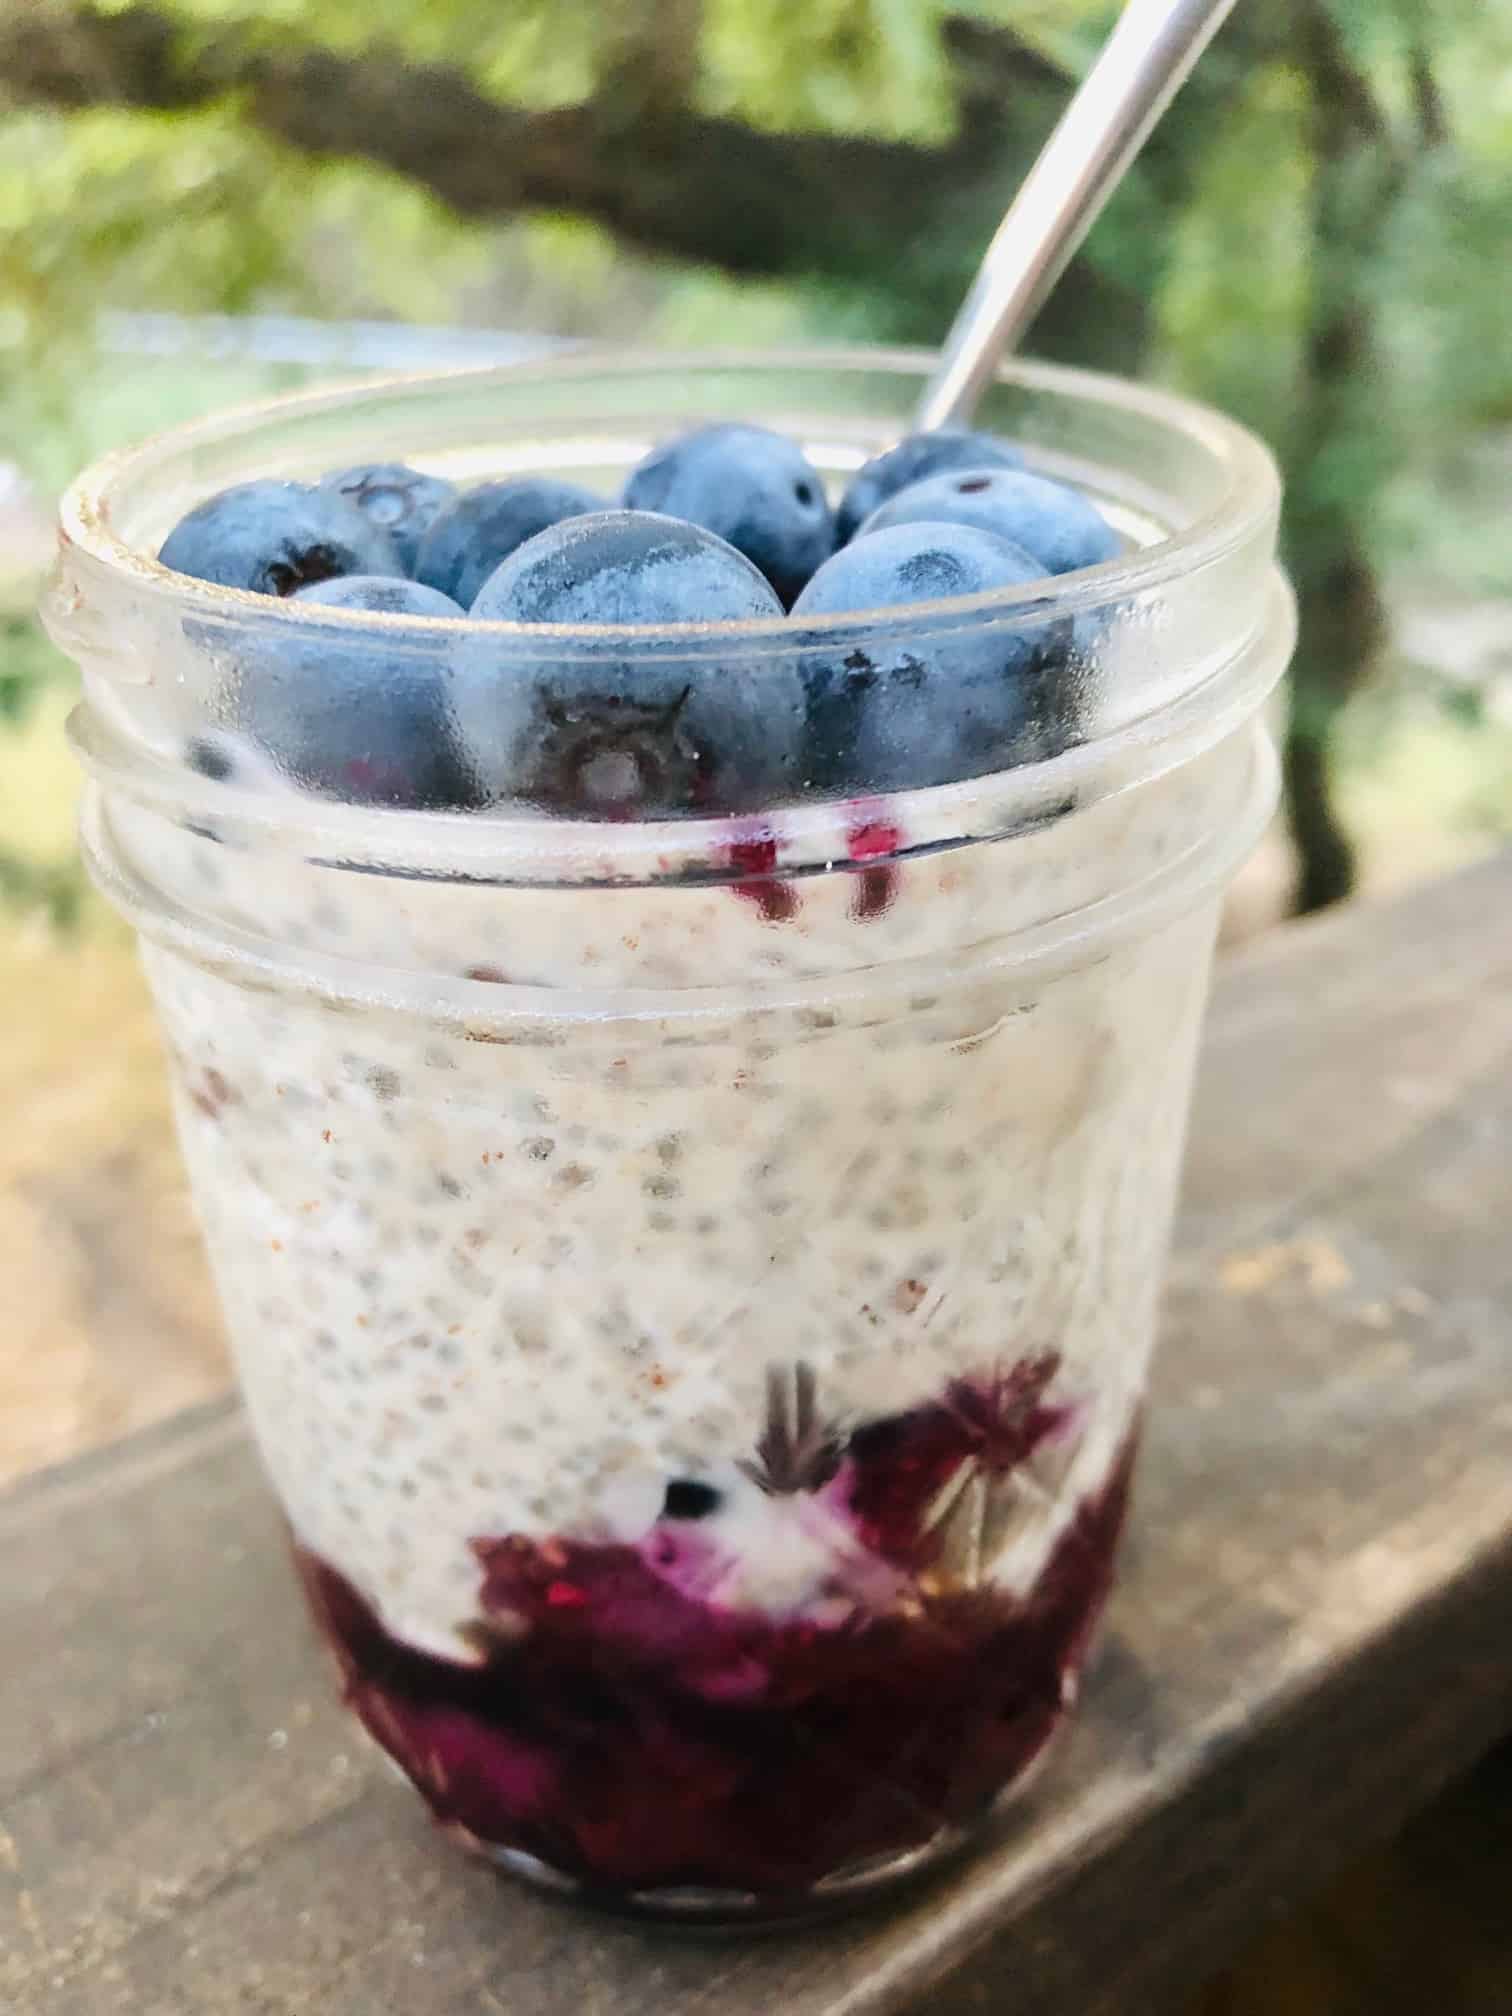 Nut Butter & Jam Chia Pudding